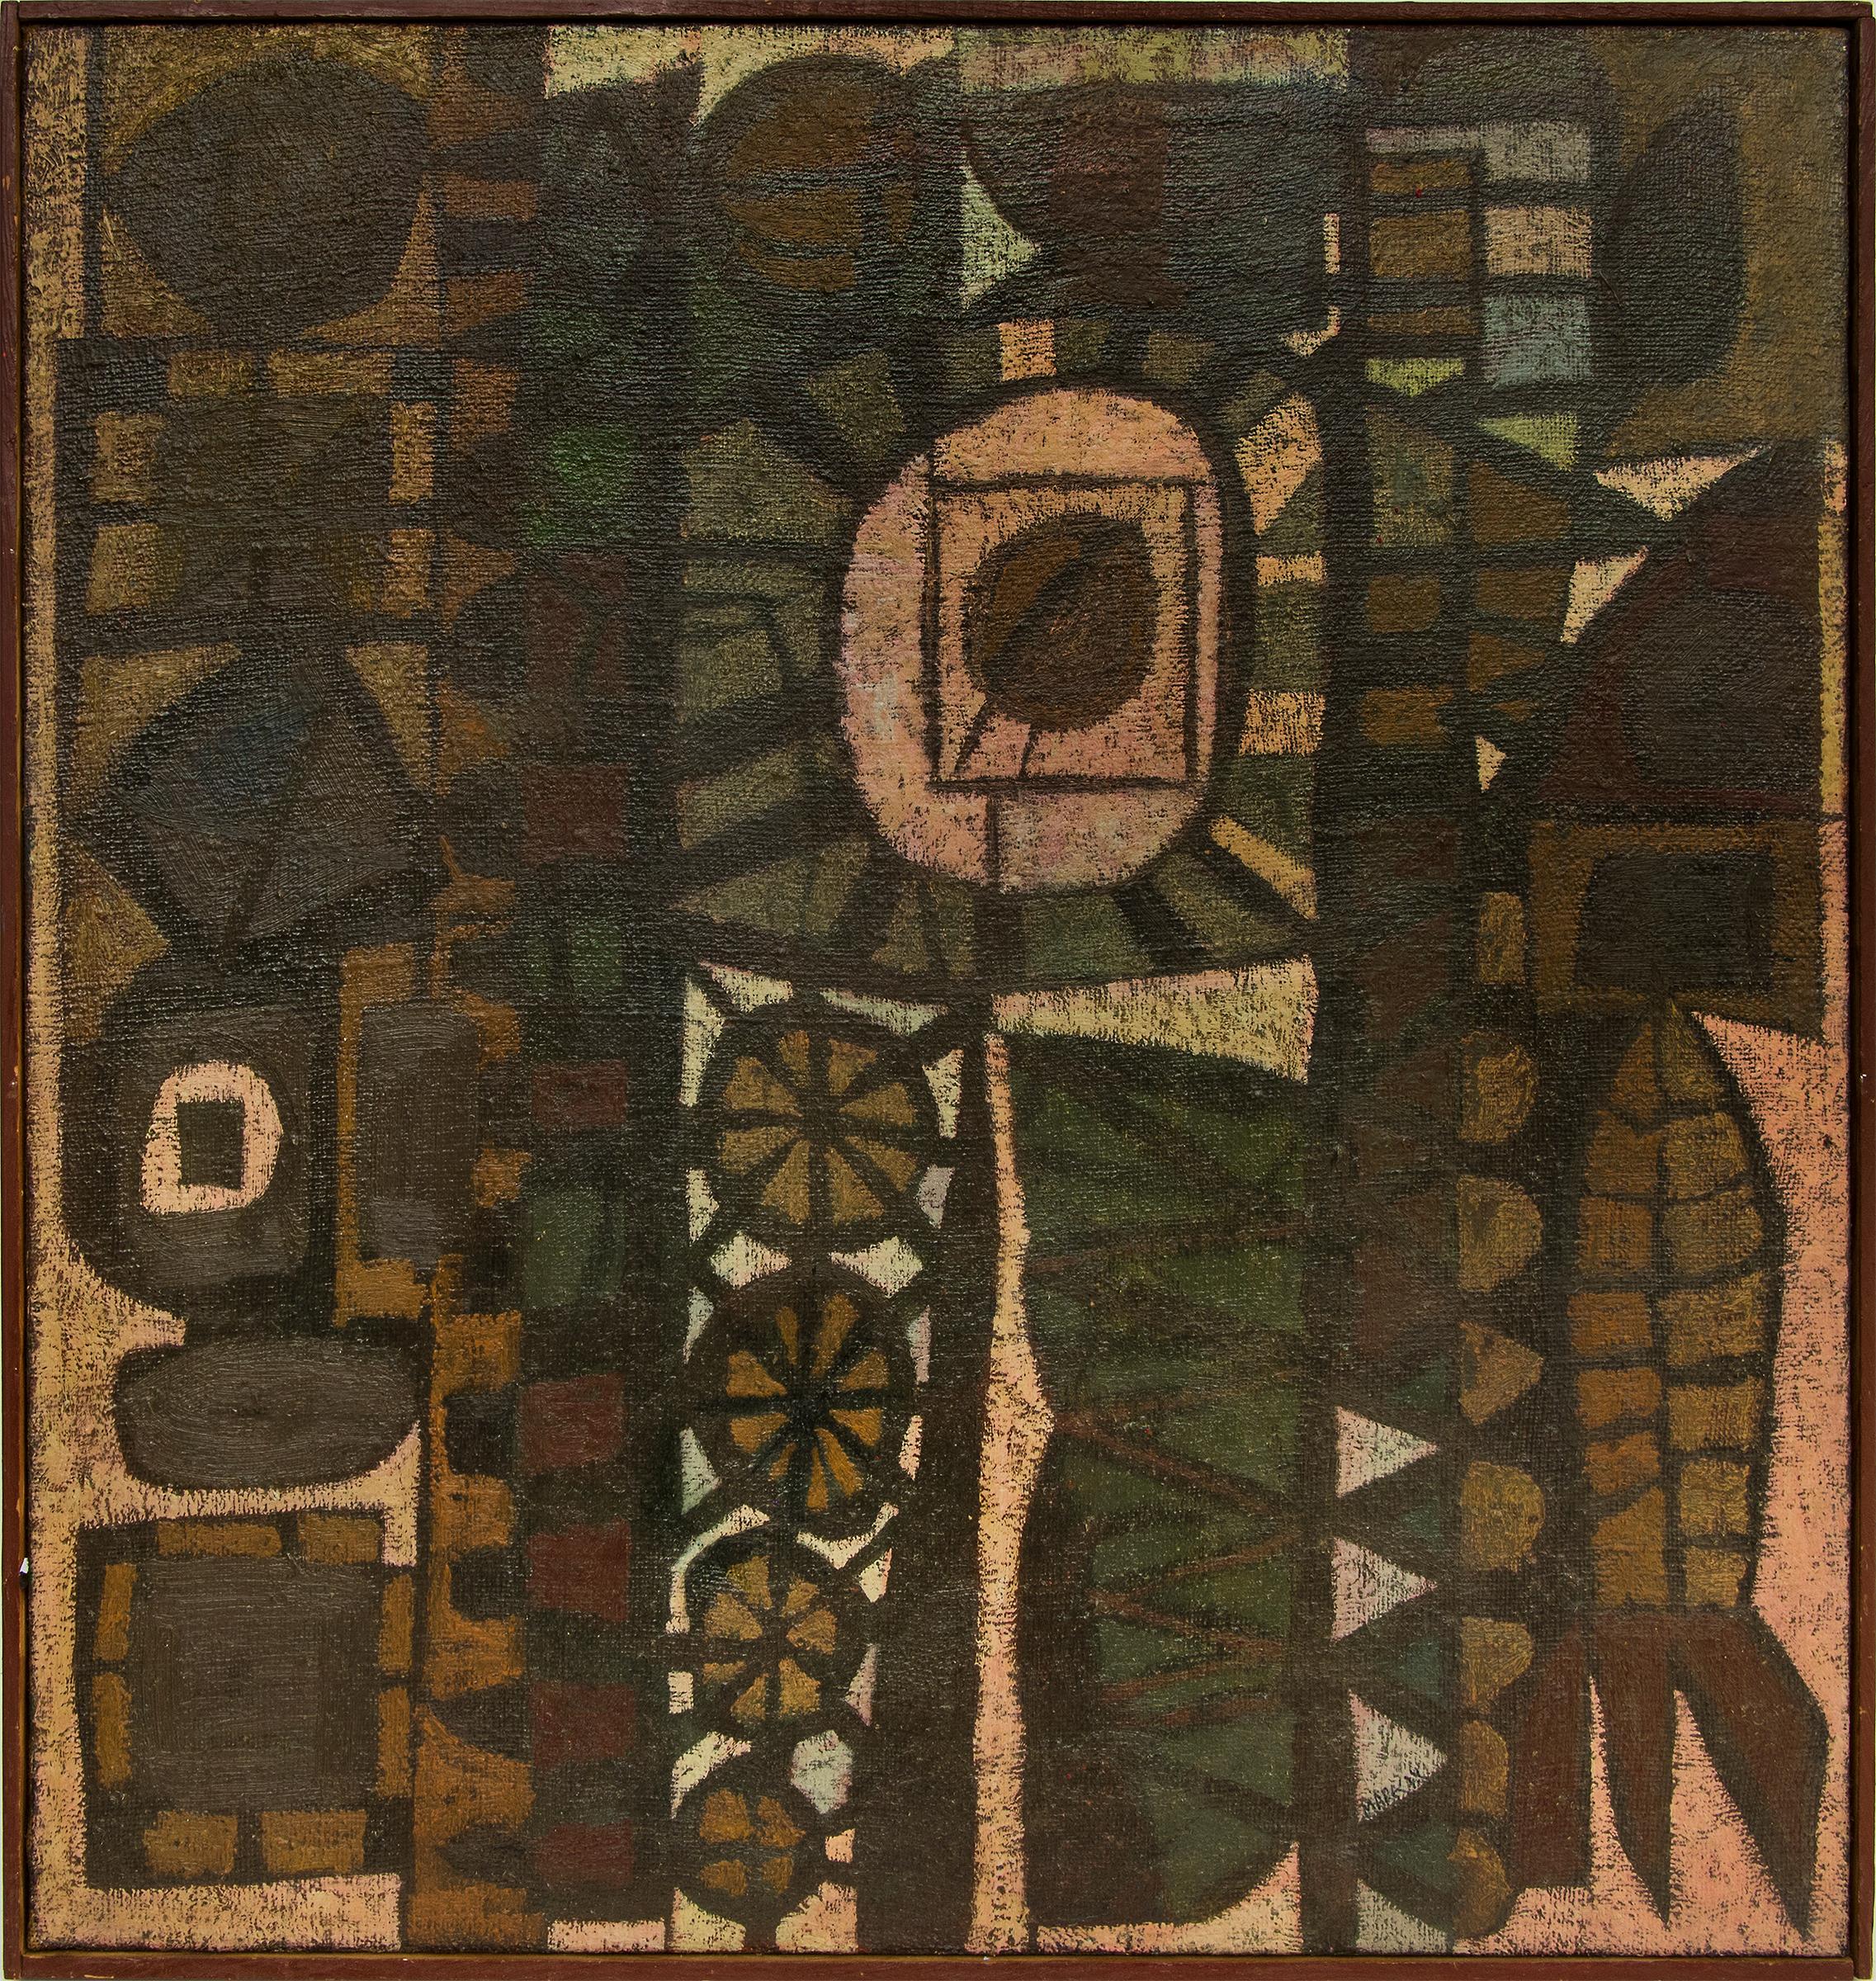 Edward Marecak Abstract Painting - Pods, Mid Century Modern Abstract Oil Painting, Brown Green, Cream, Tan